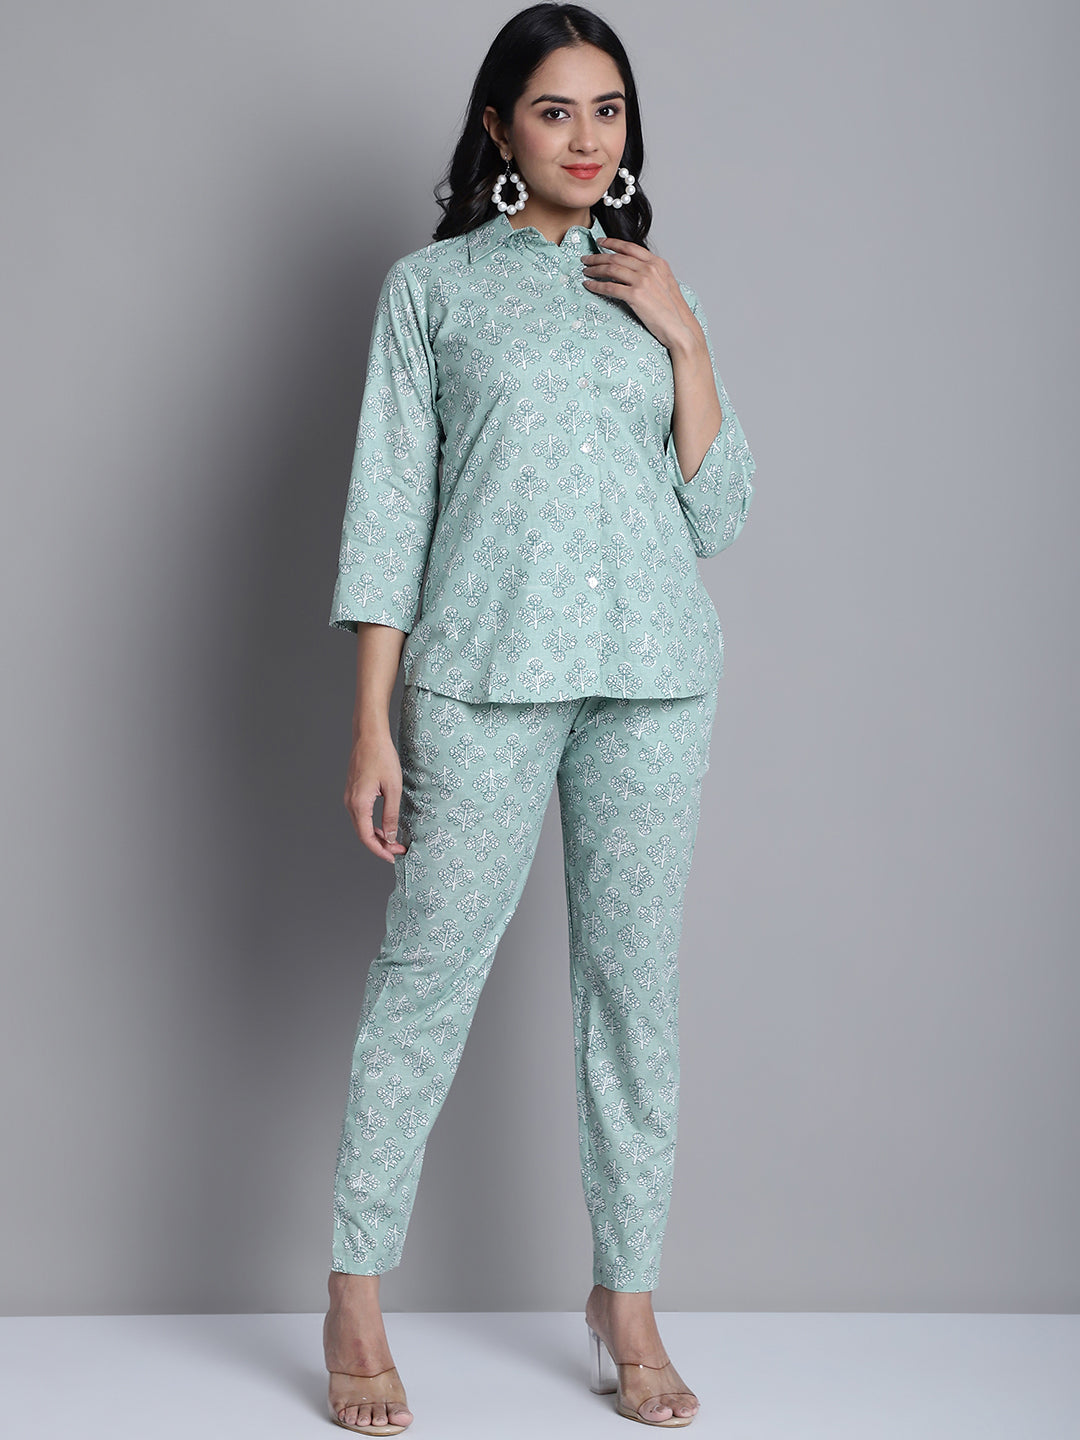 Women's Lime Green Printed Shirt and Trouser Co-ords Set ( JNCS 3008 Lime )